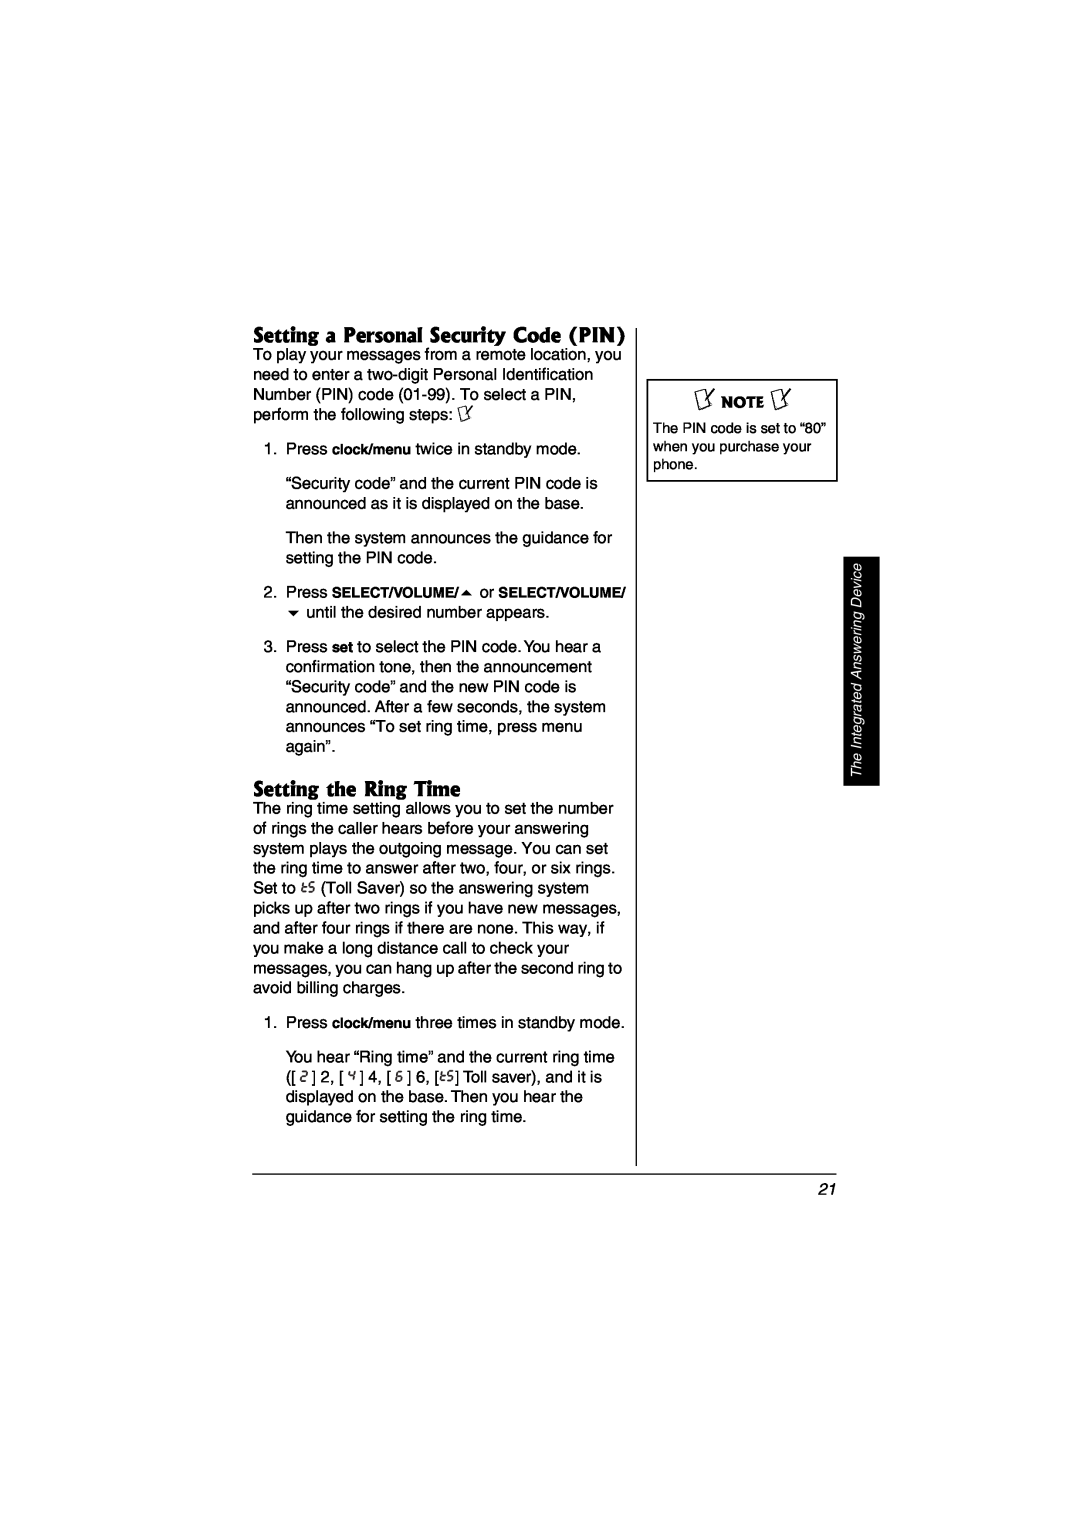 Radio Shack 43-3823 owner manual Setting a Personal Security Code PIN, Setting the Ring Time 